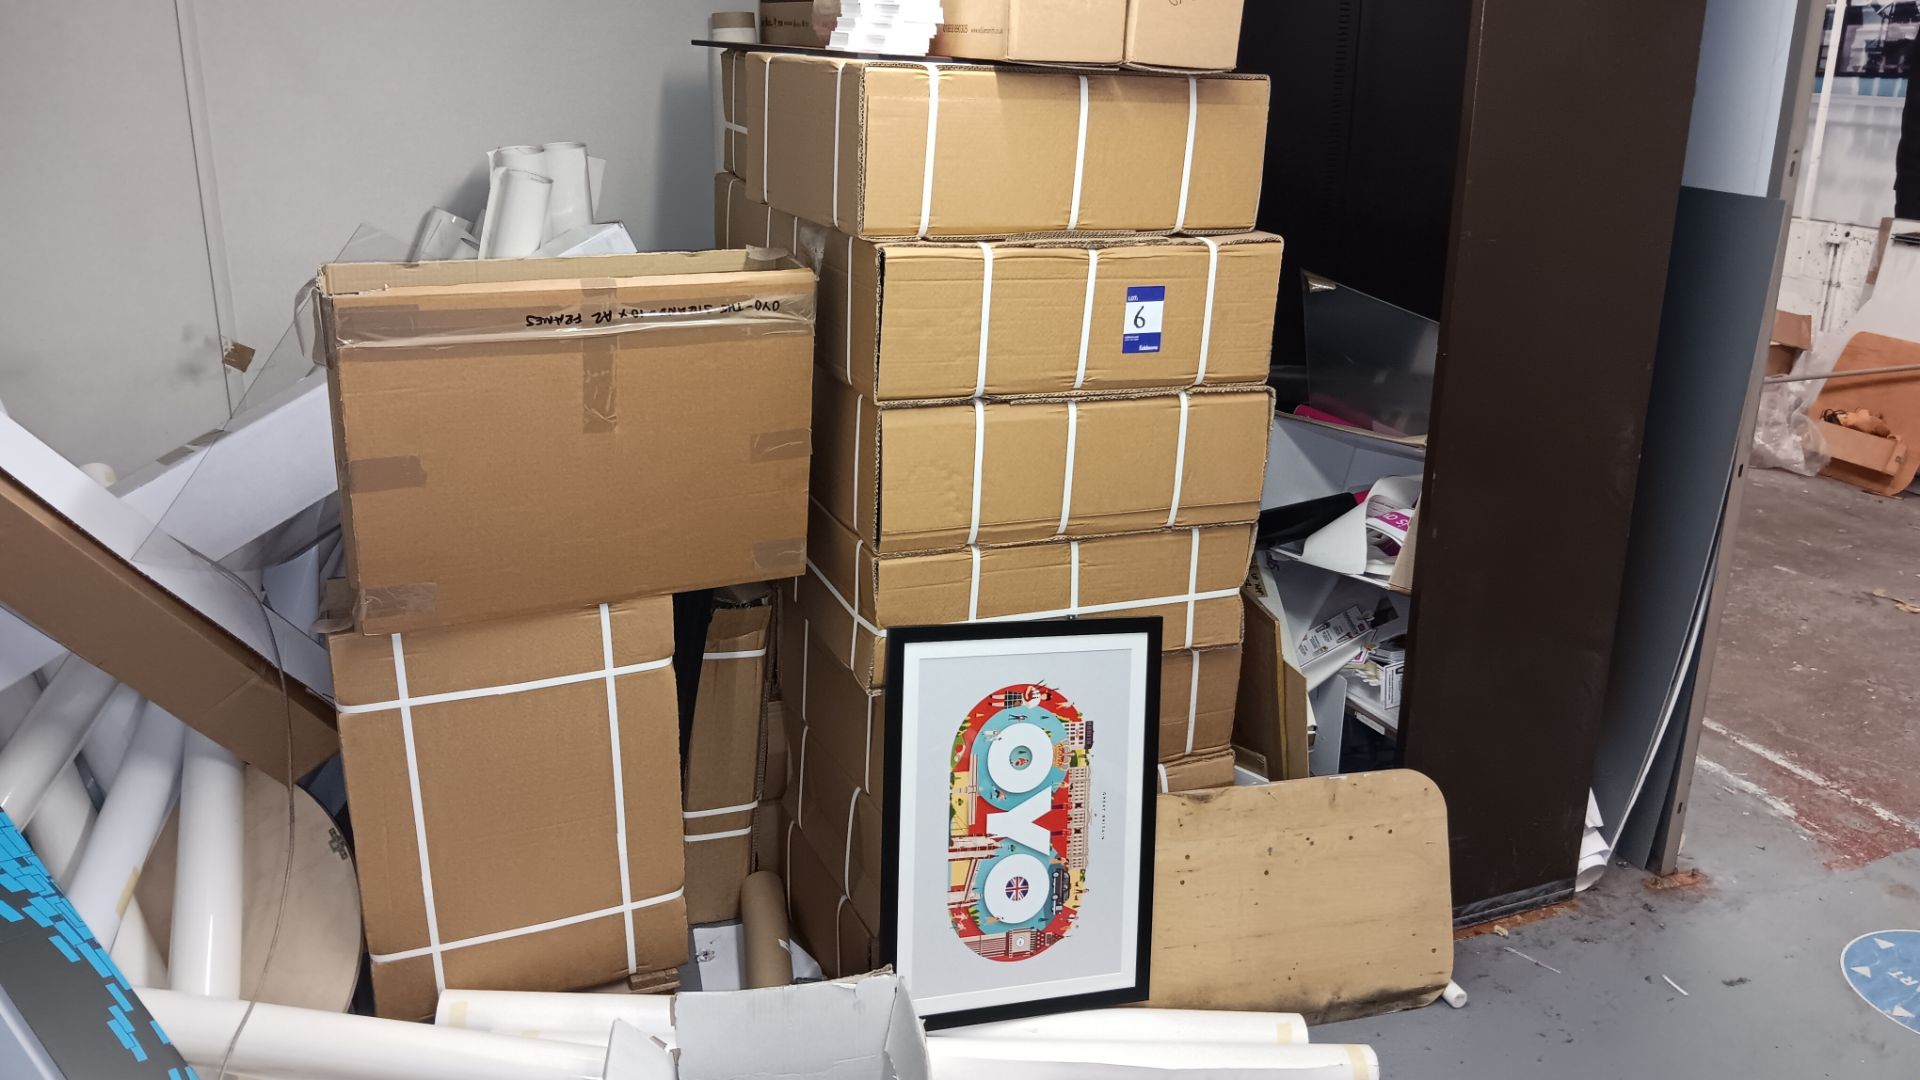 16 x boxes on A2 photo frames – Located in Unit 1